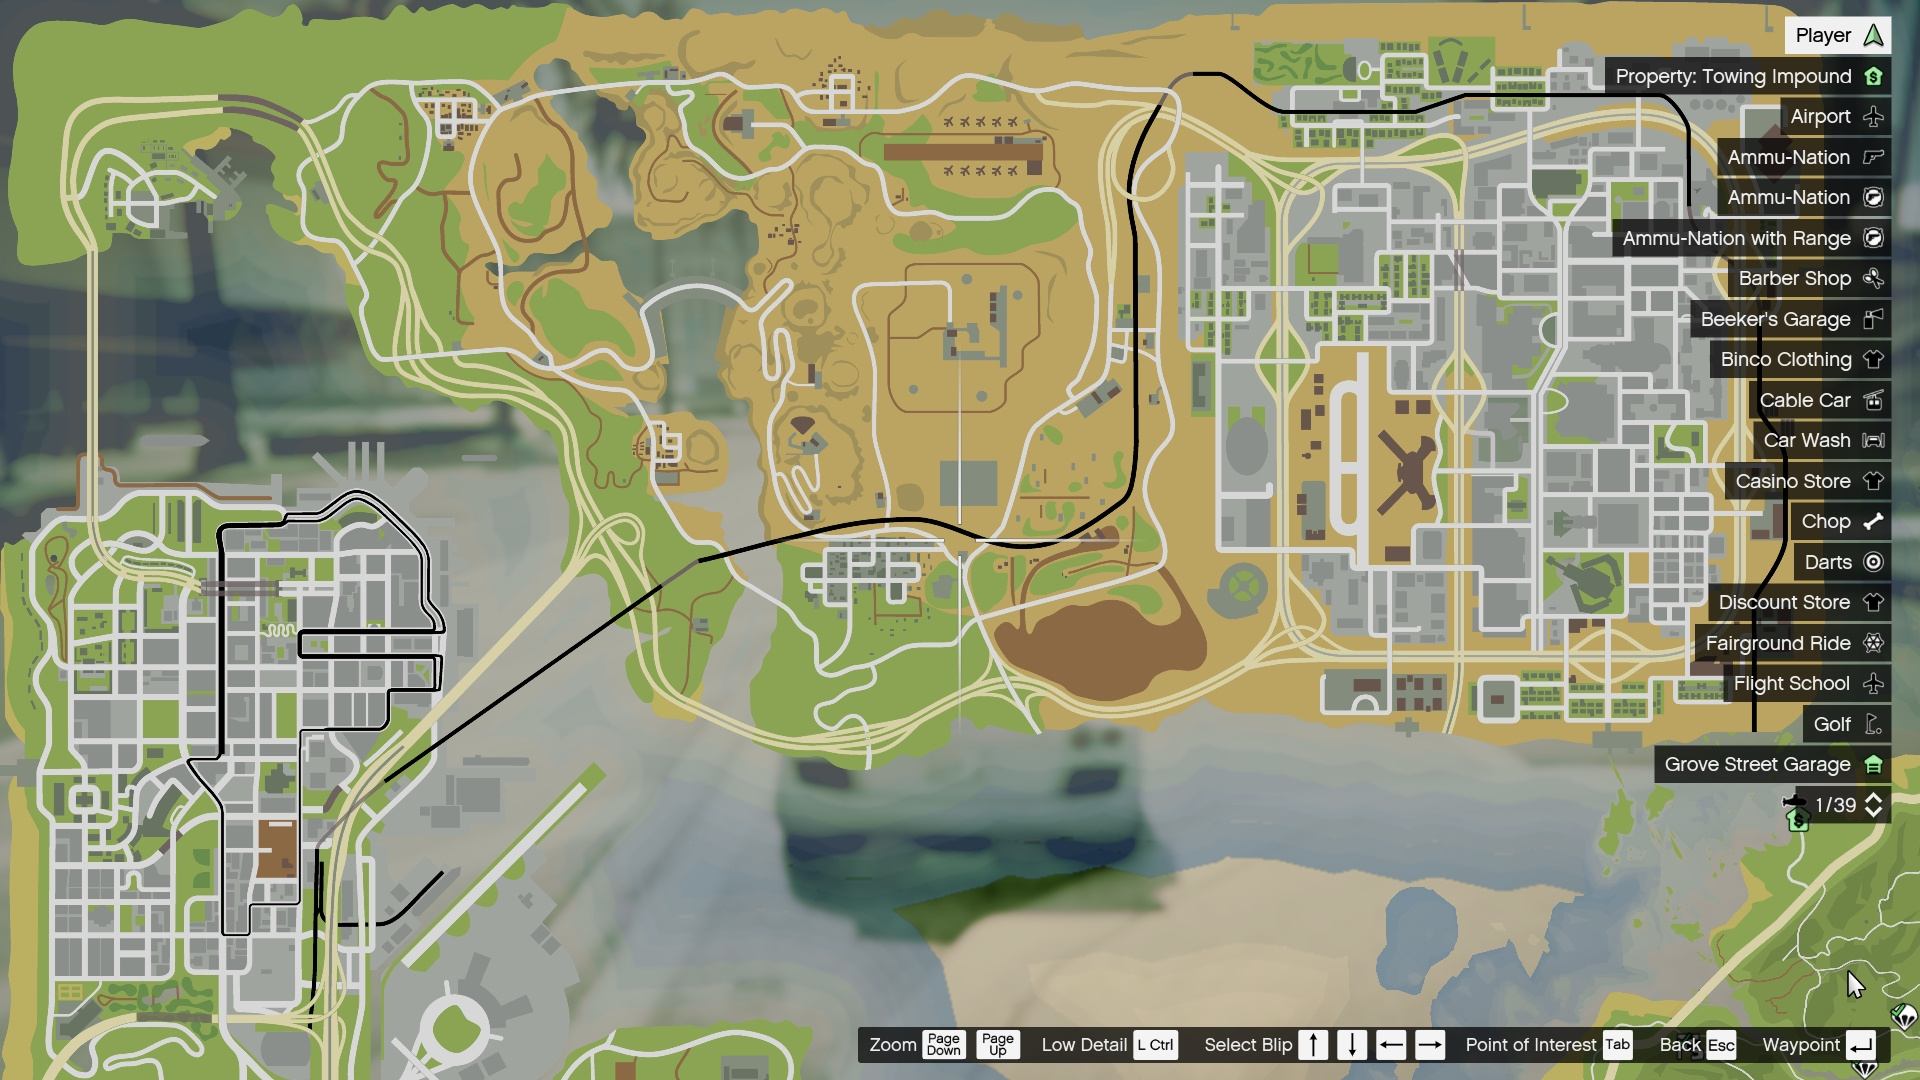 How To Install: Realistic Street Location/Address Atlas Map for GTA V 